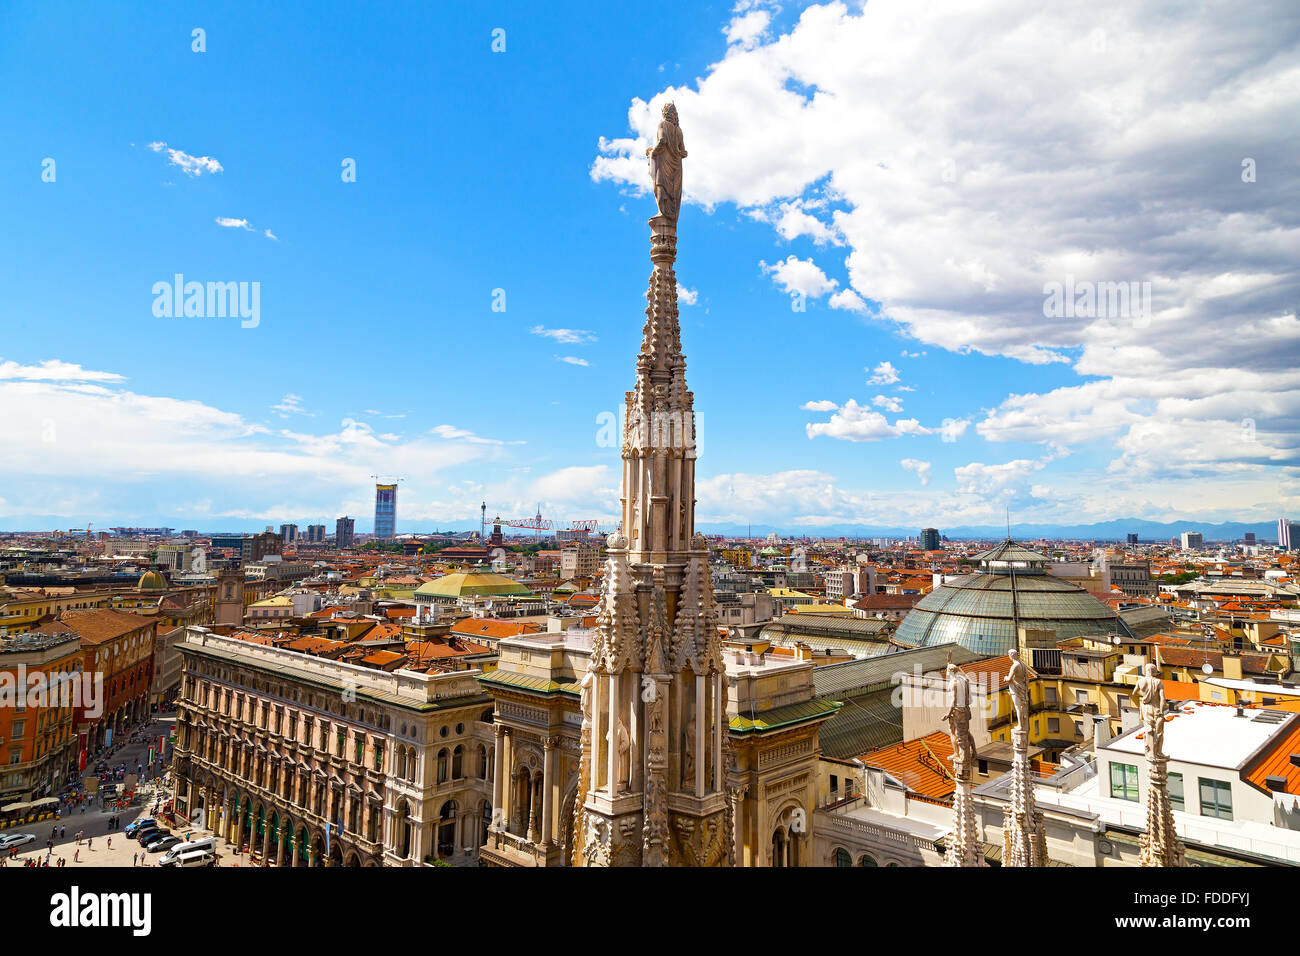 A statue of the Dome of Milan cathedral with the city view in summer. Stock Photo